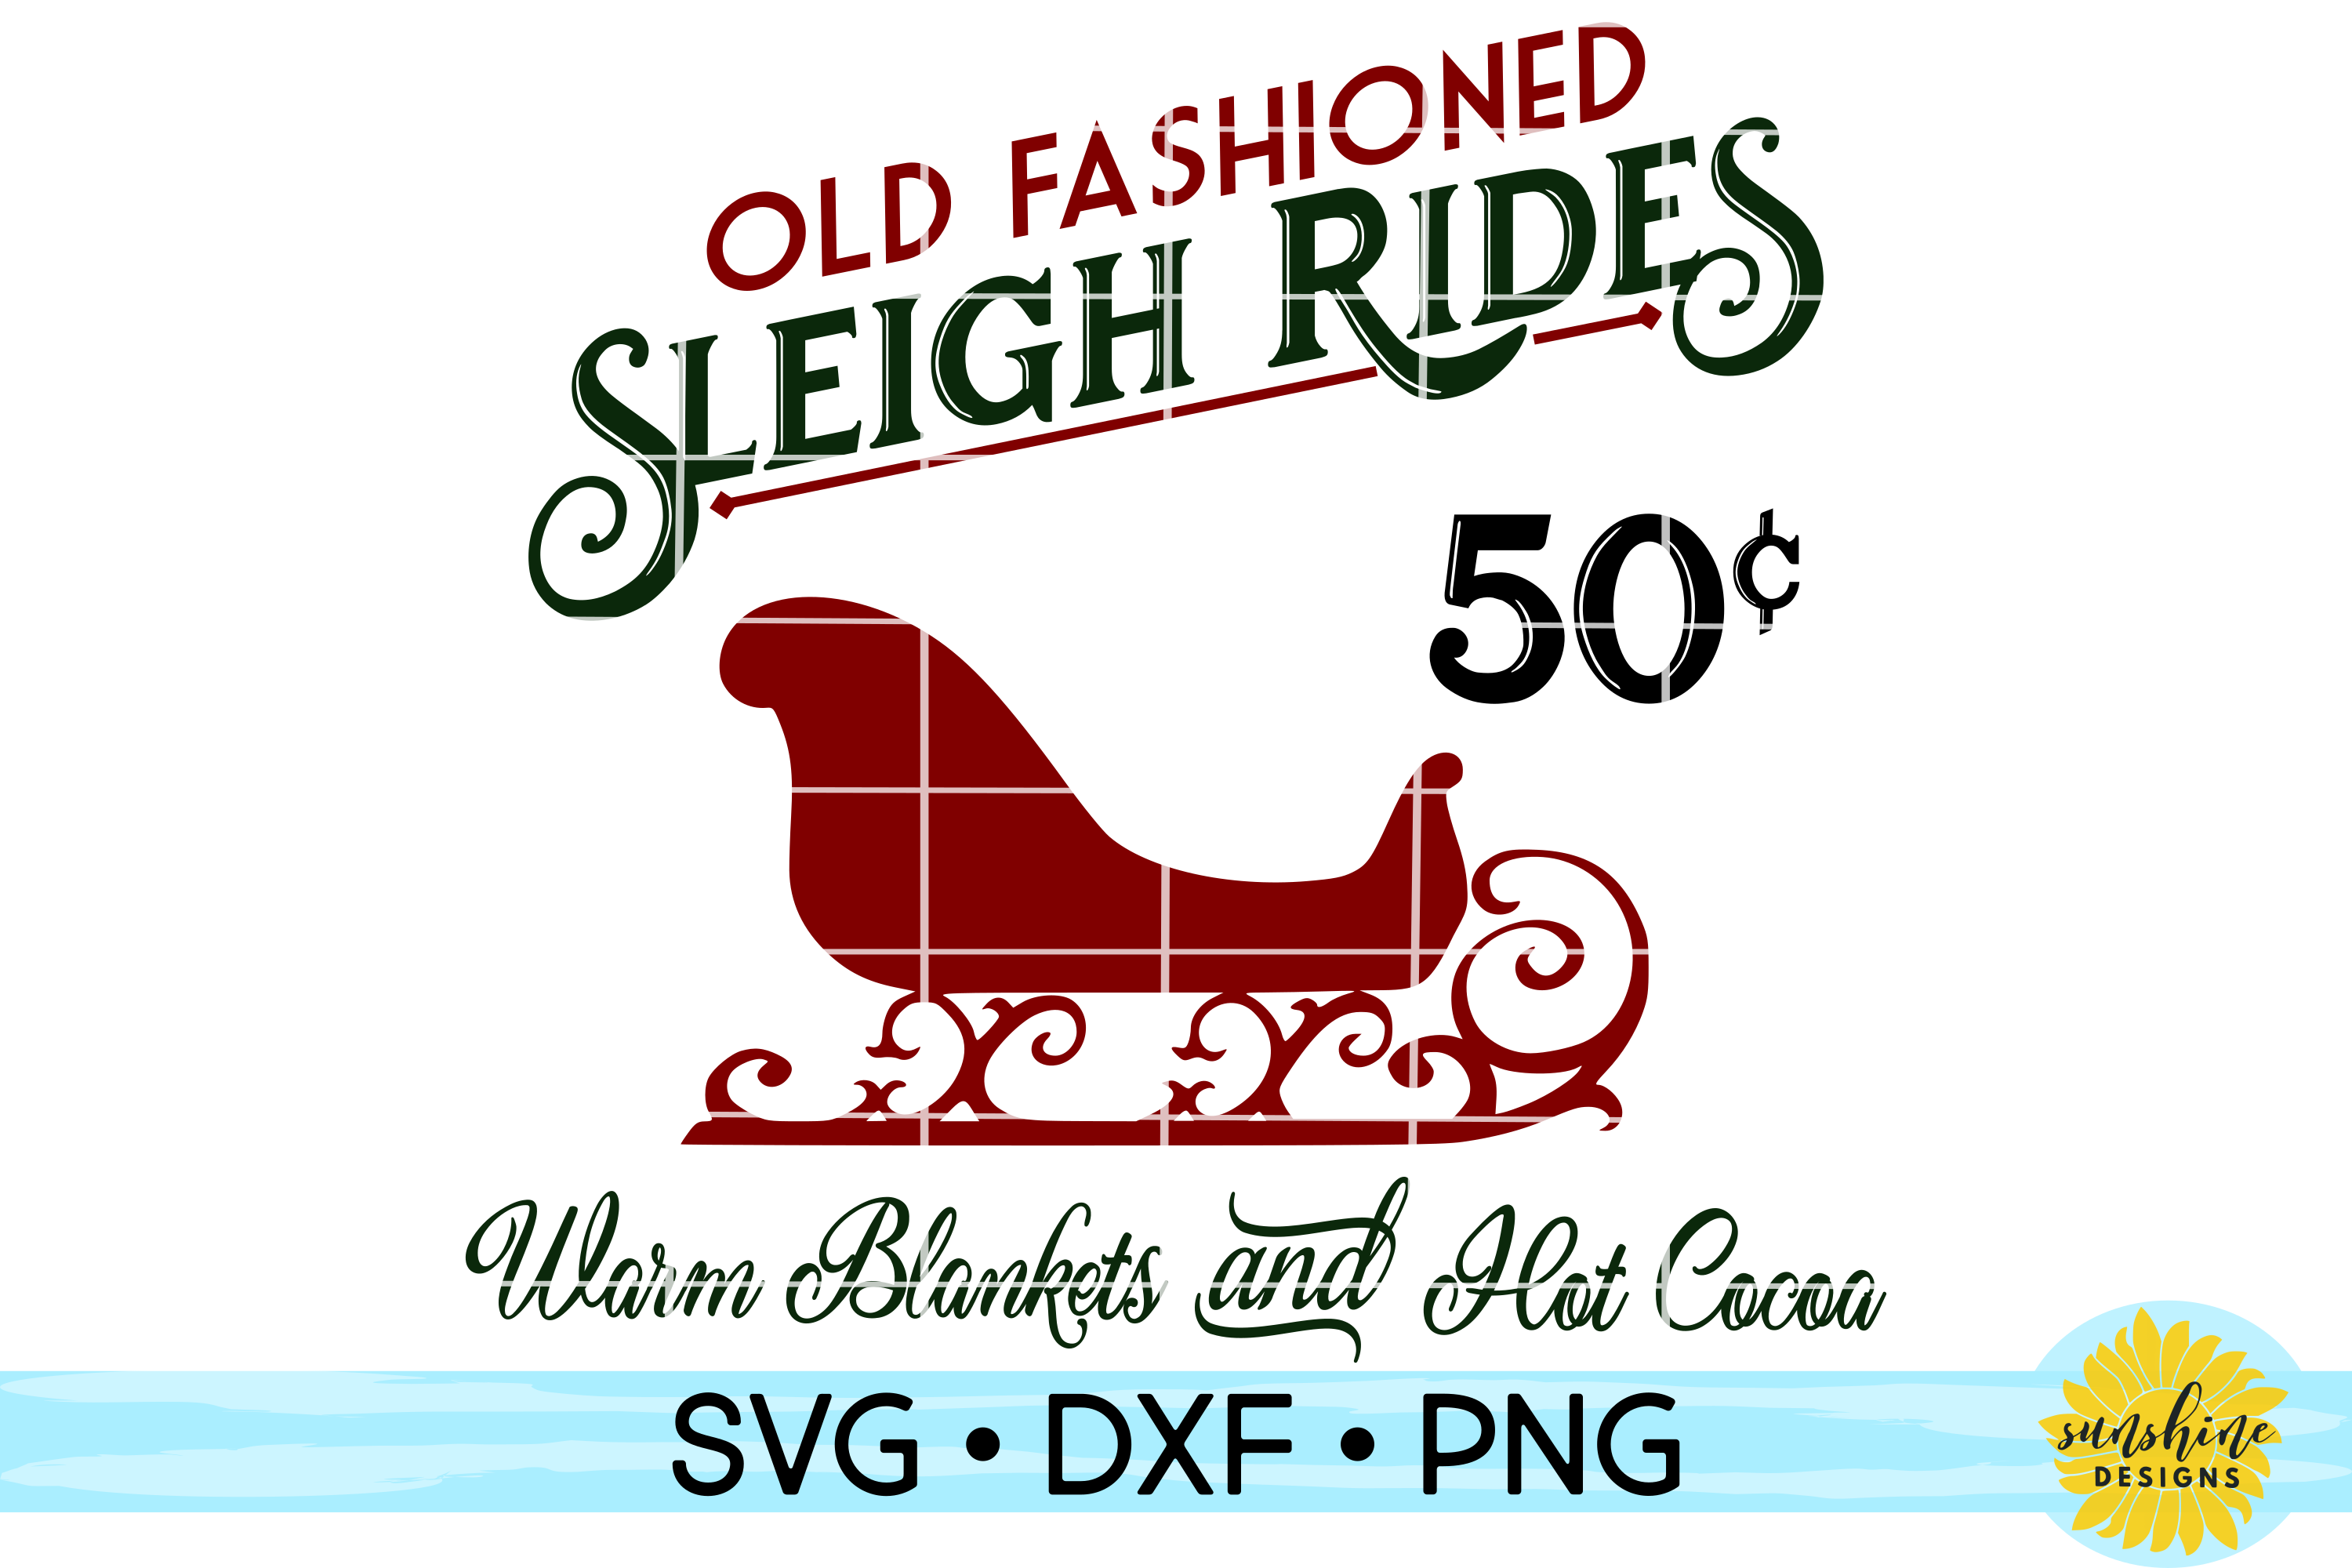 Download OLD FASHIONED SLEIGH RIDES | CHRISTMAS SIGN SVG DXF PNG